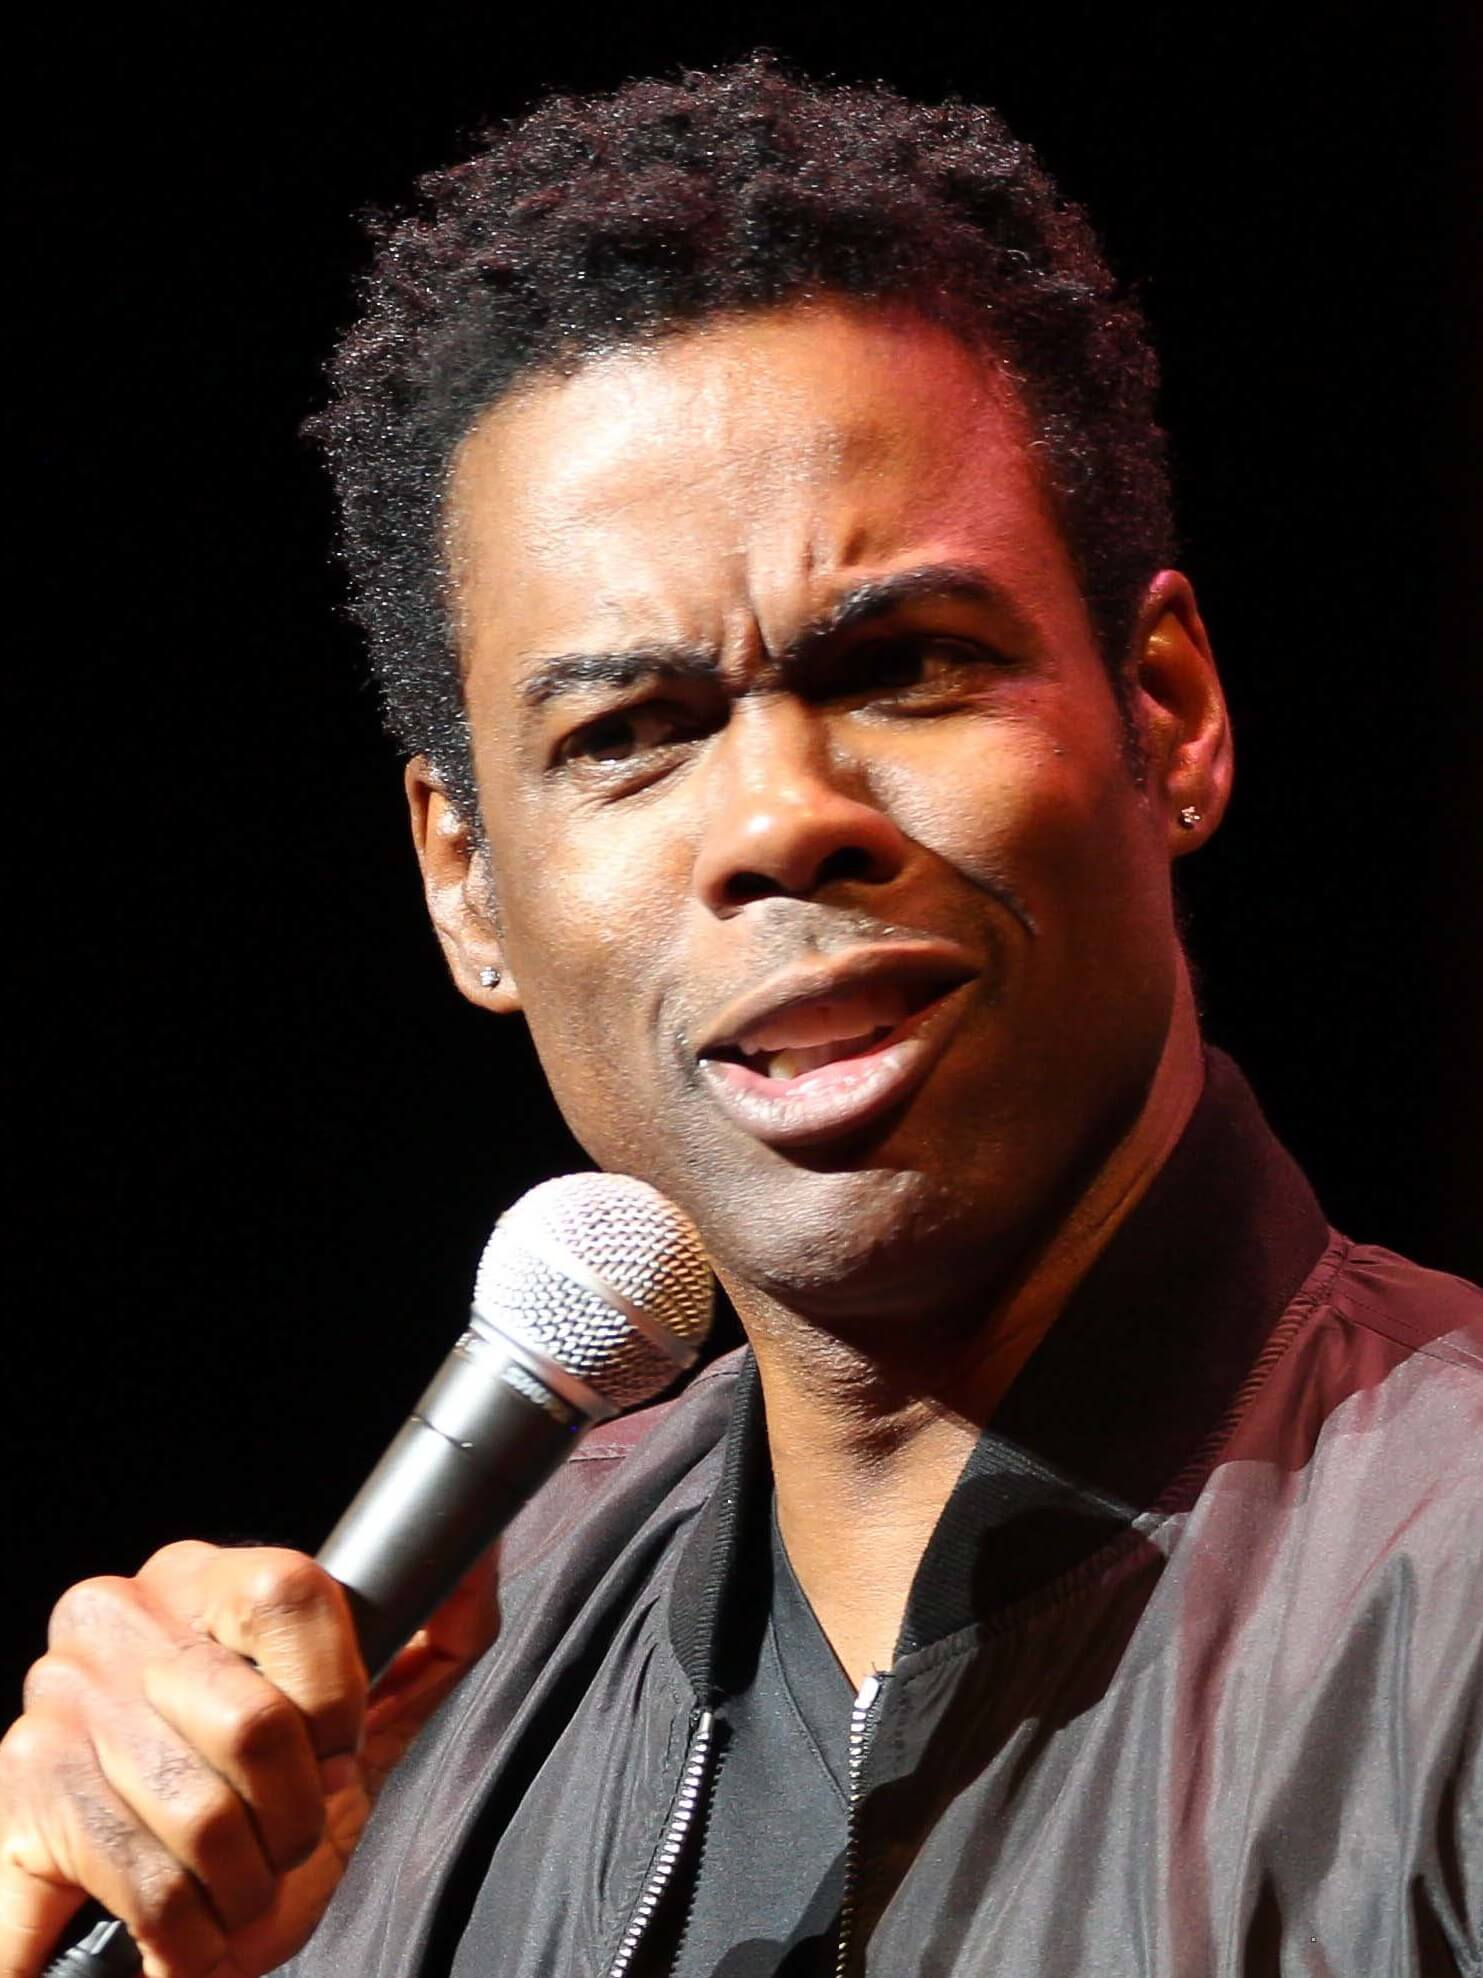 How tall is Chris Rock?